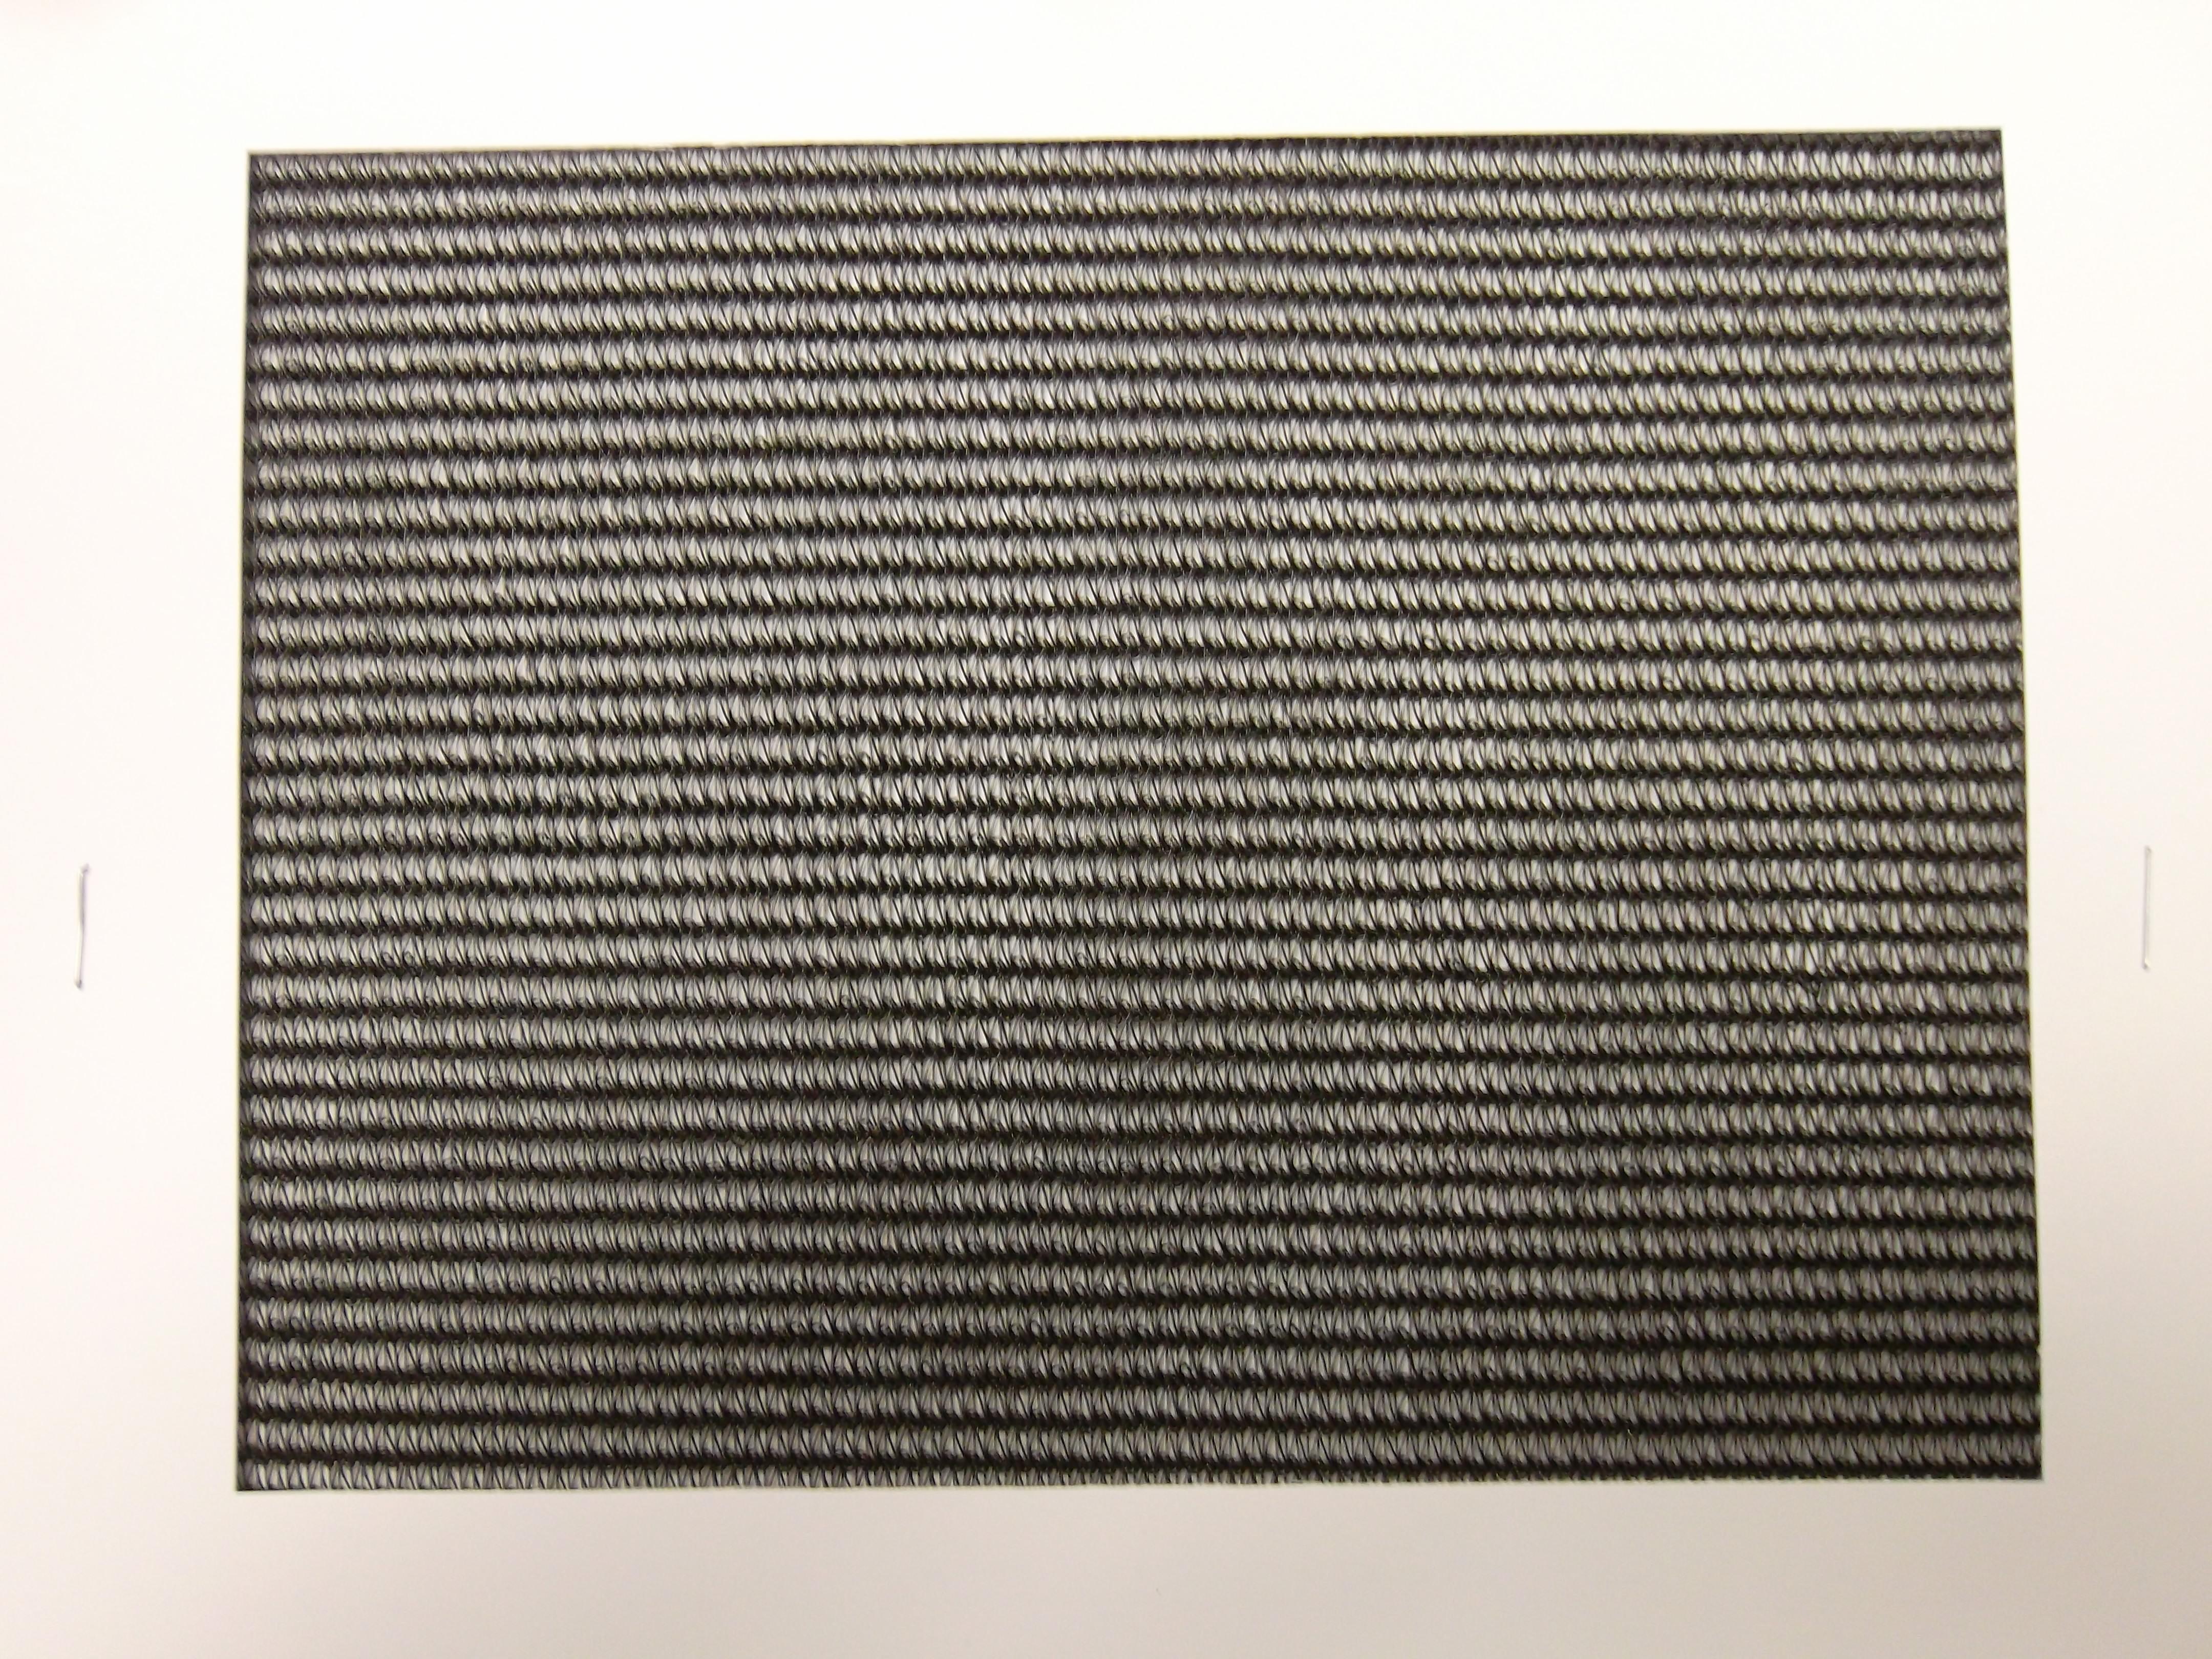 Airsoft Netting 20' x 300' w/ grommets & edges